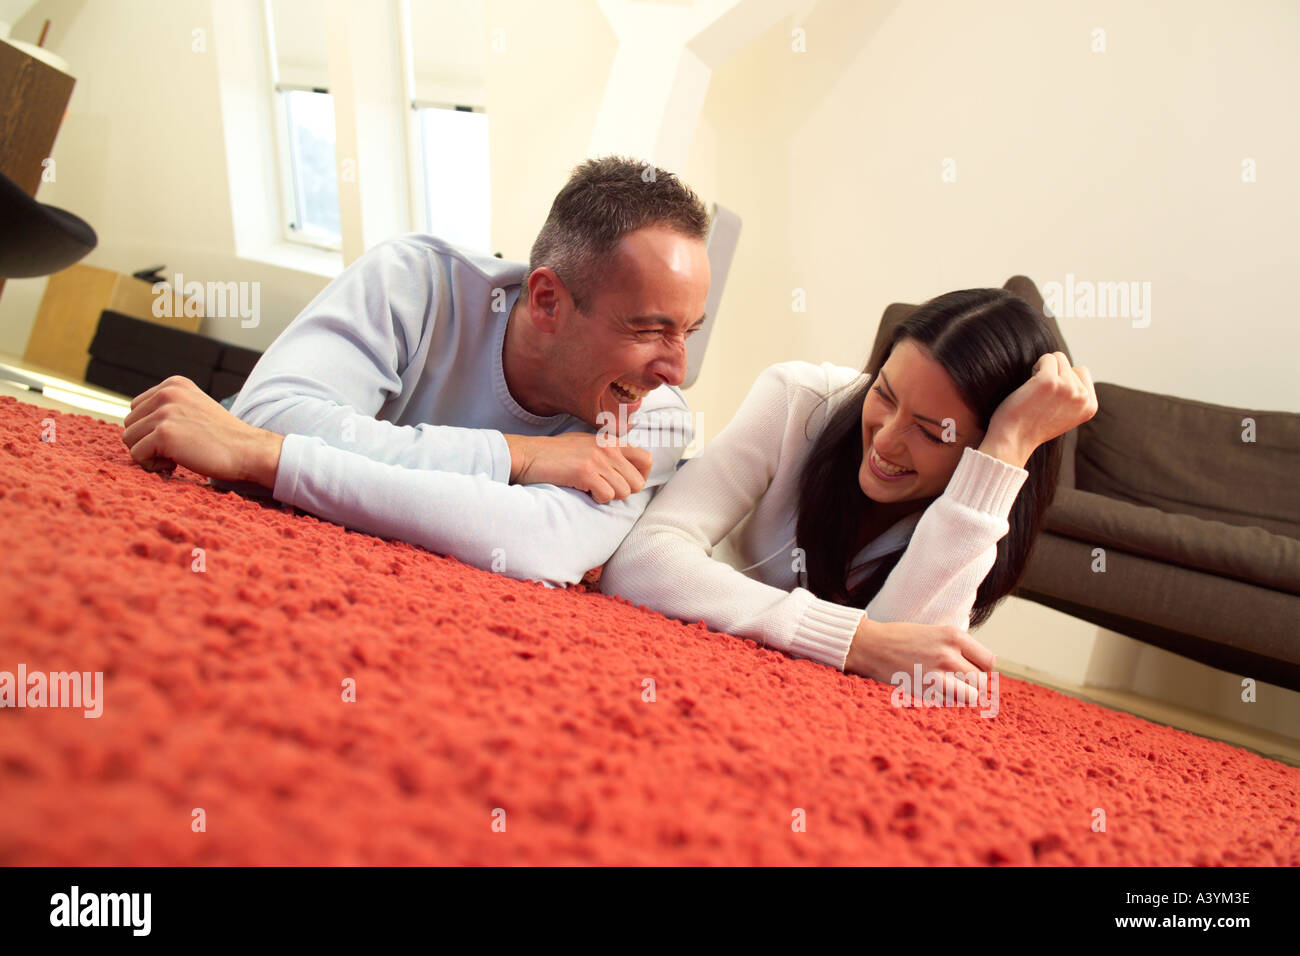 young couple lying on the carpet having a laugh Stock Photo